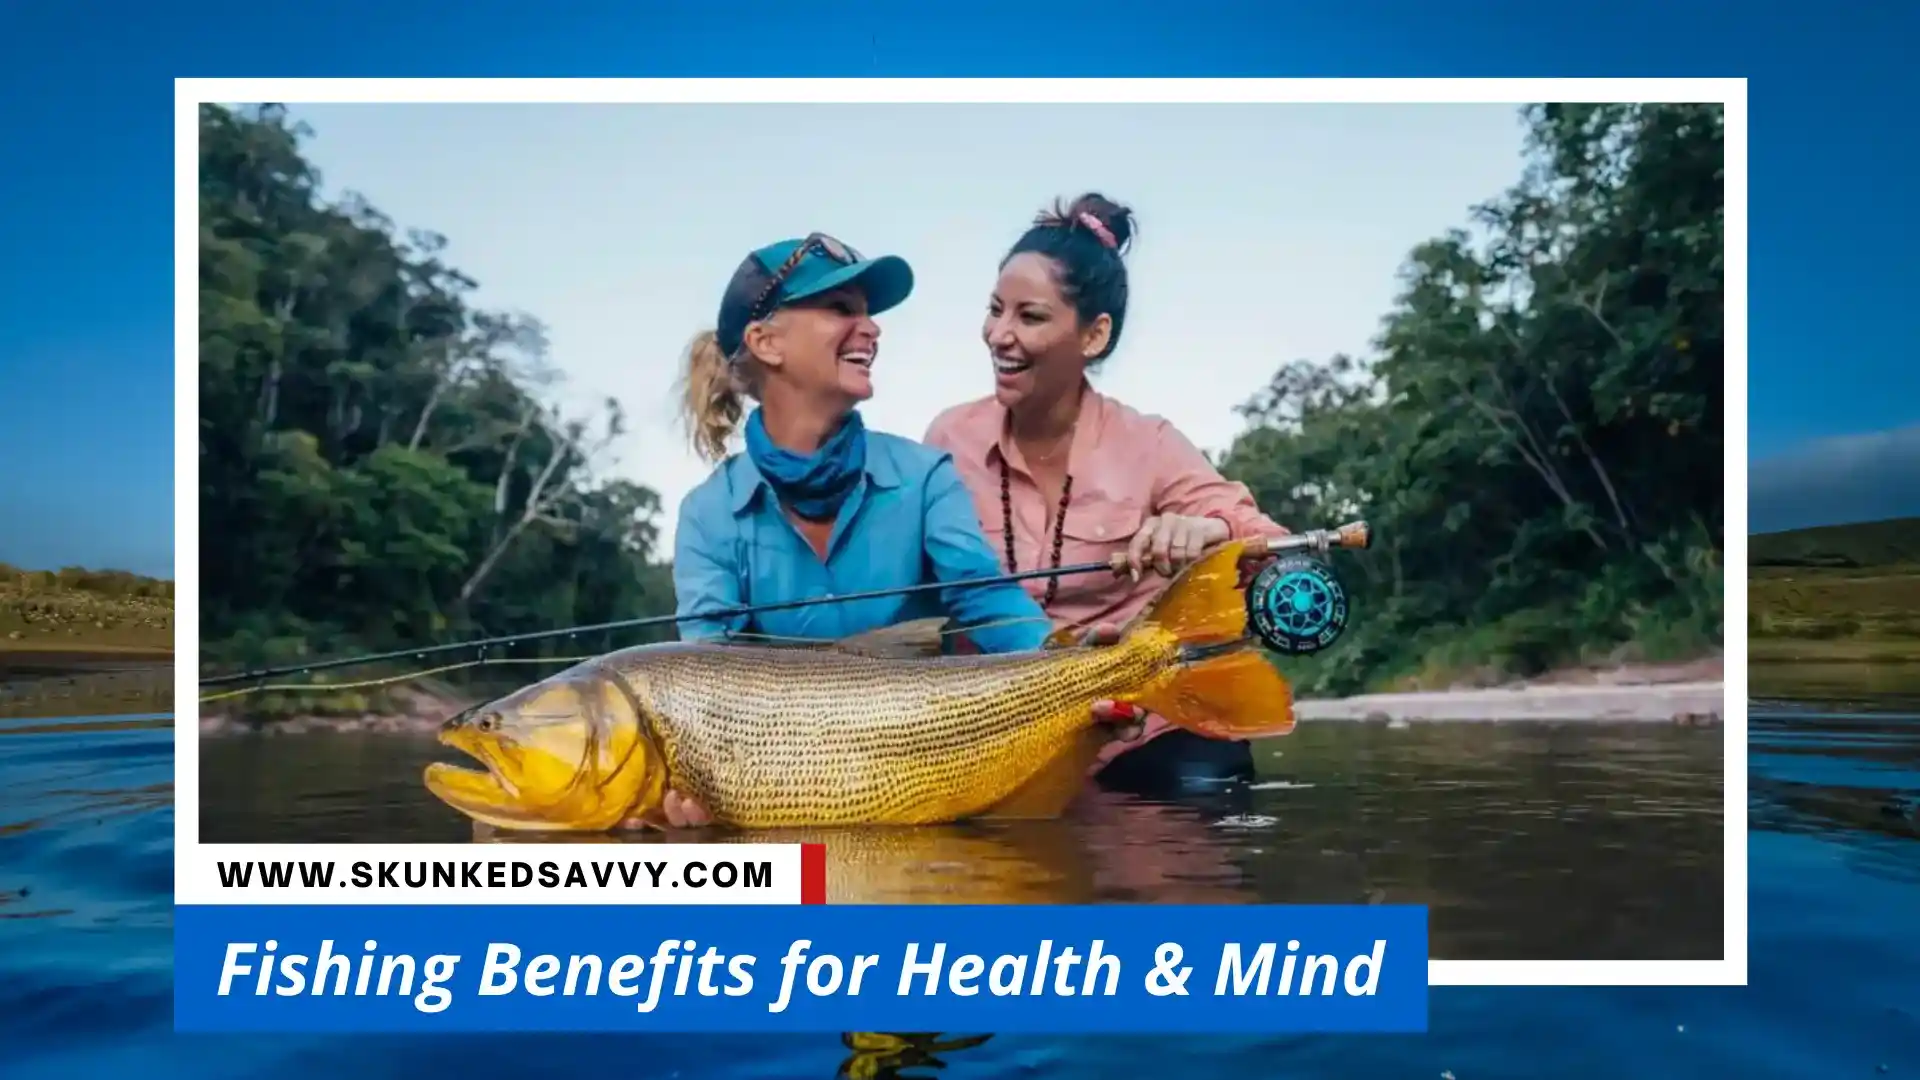 Fishing Benefits for Health & Mind